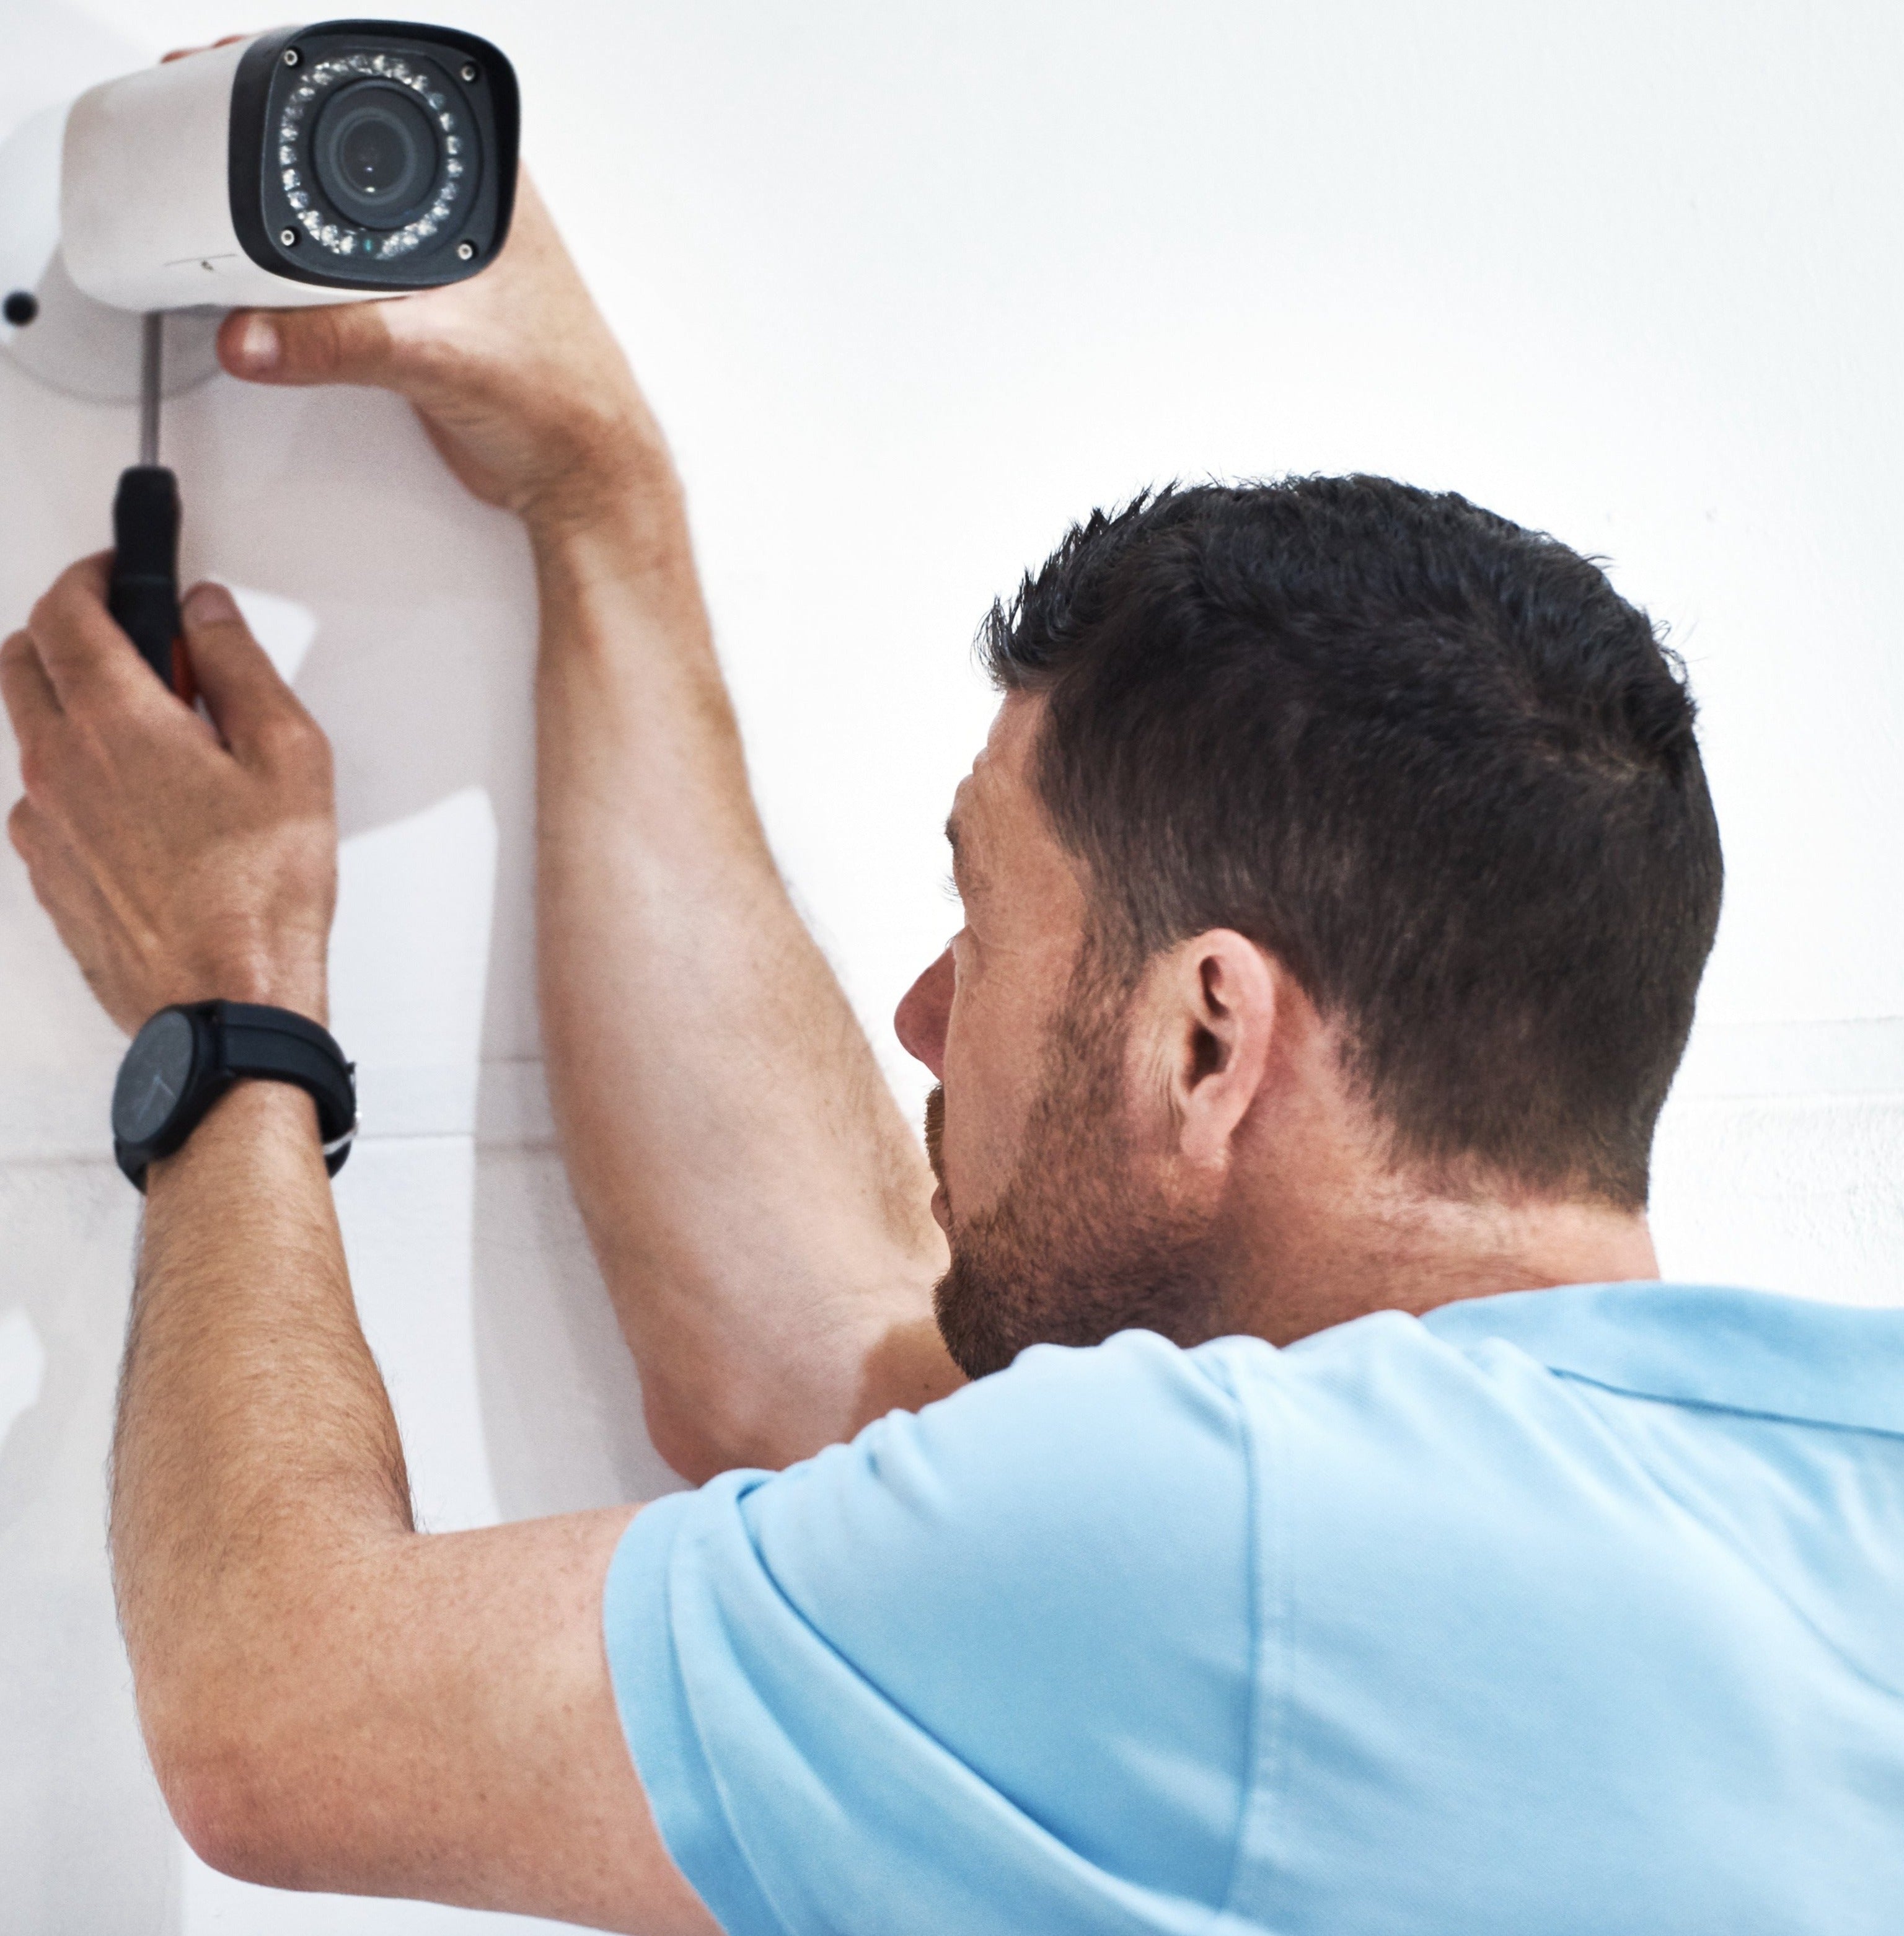 Security Cameras Professional Installation Services